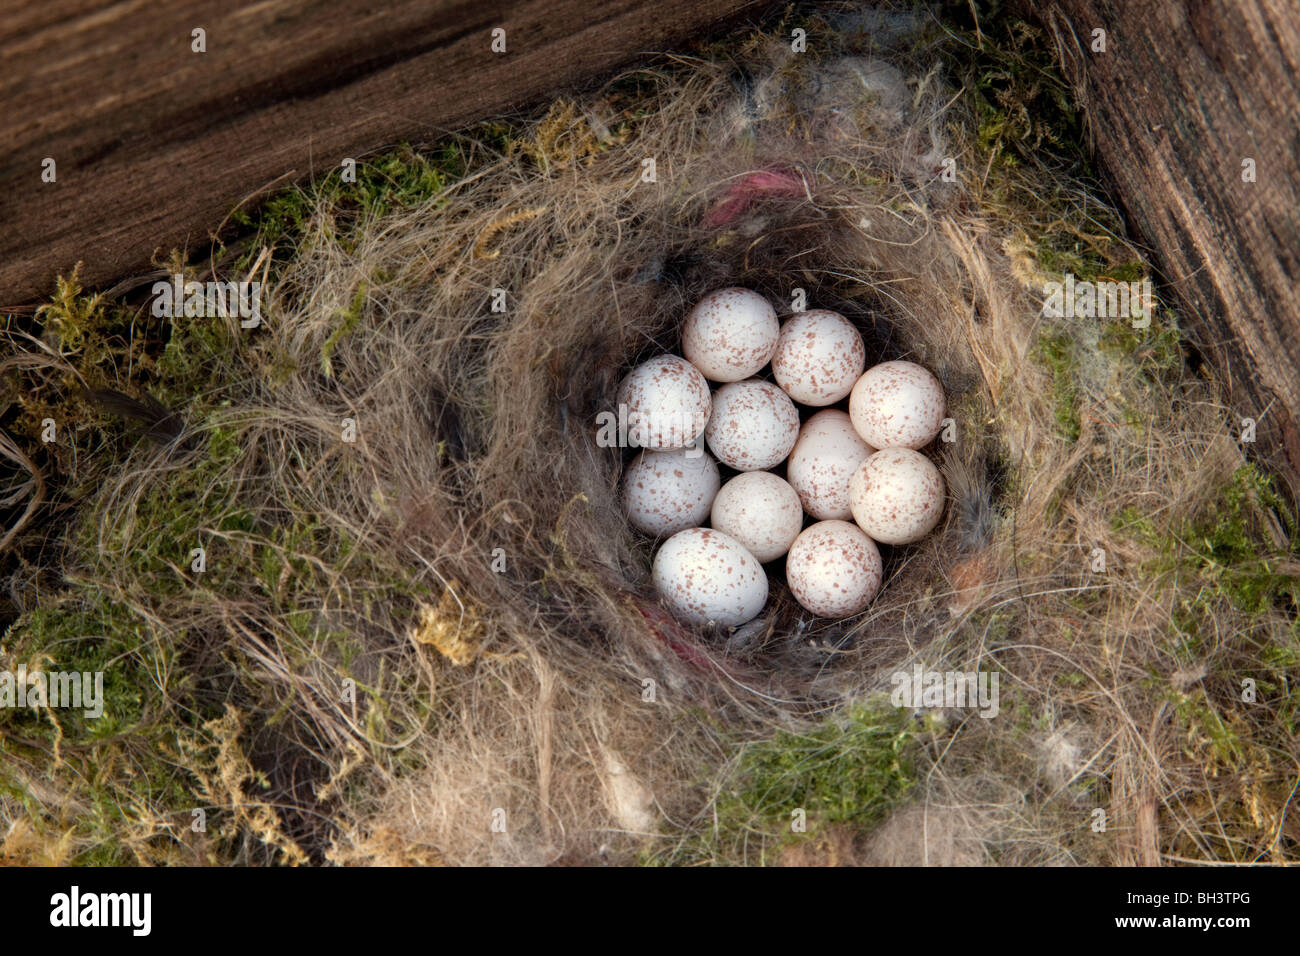 A clutch of Blue Tit eggs abandoned after predation of one of the ...